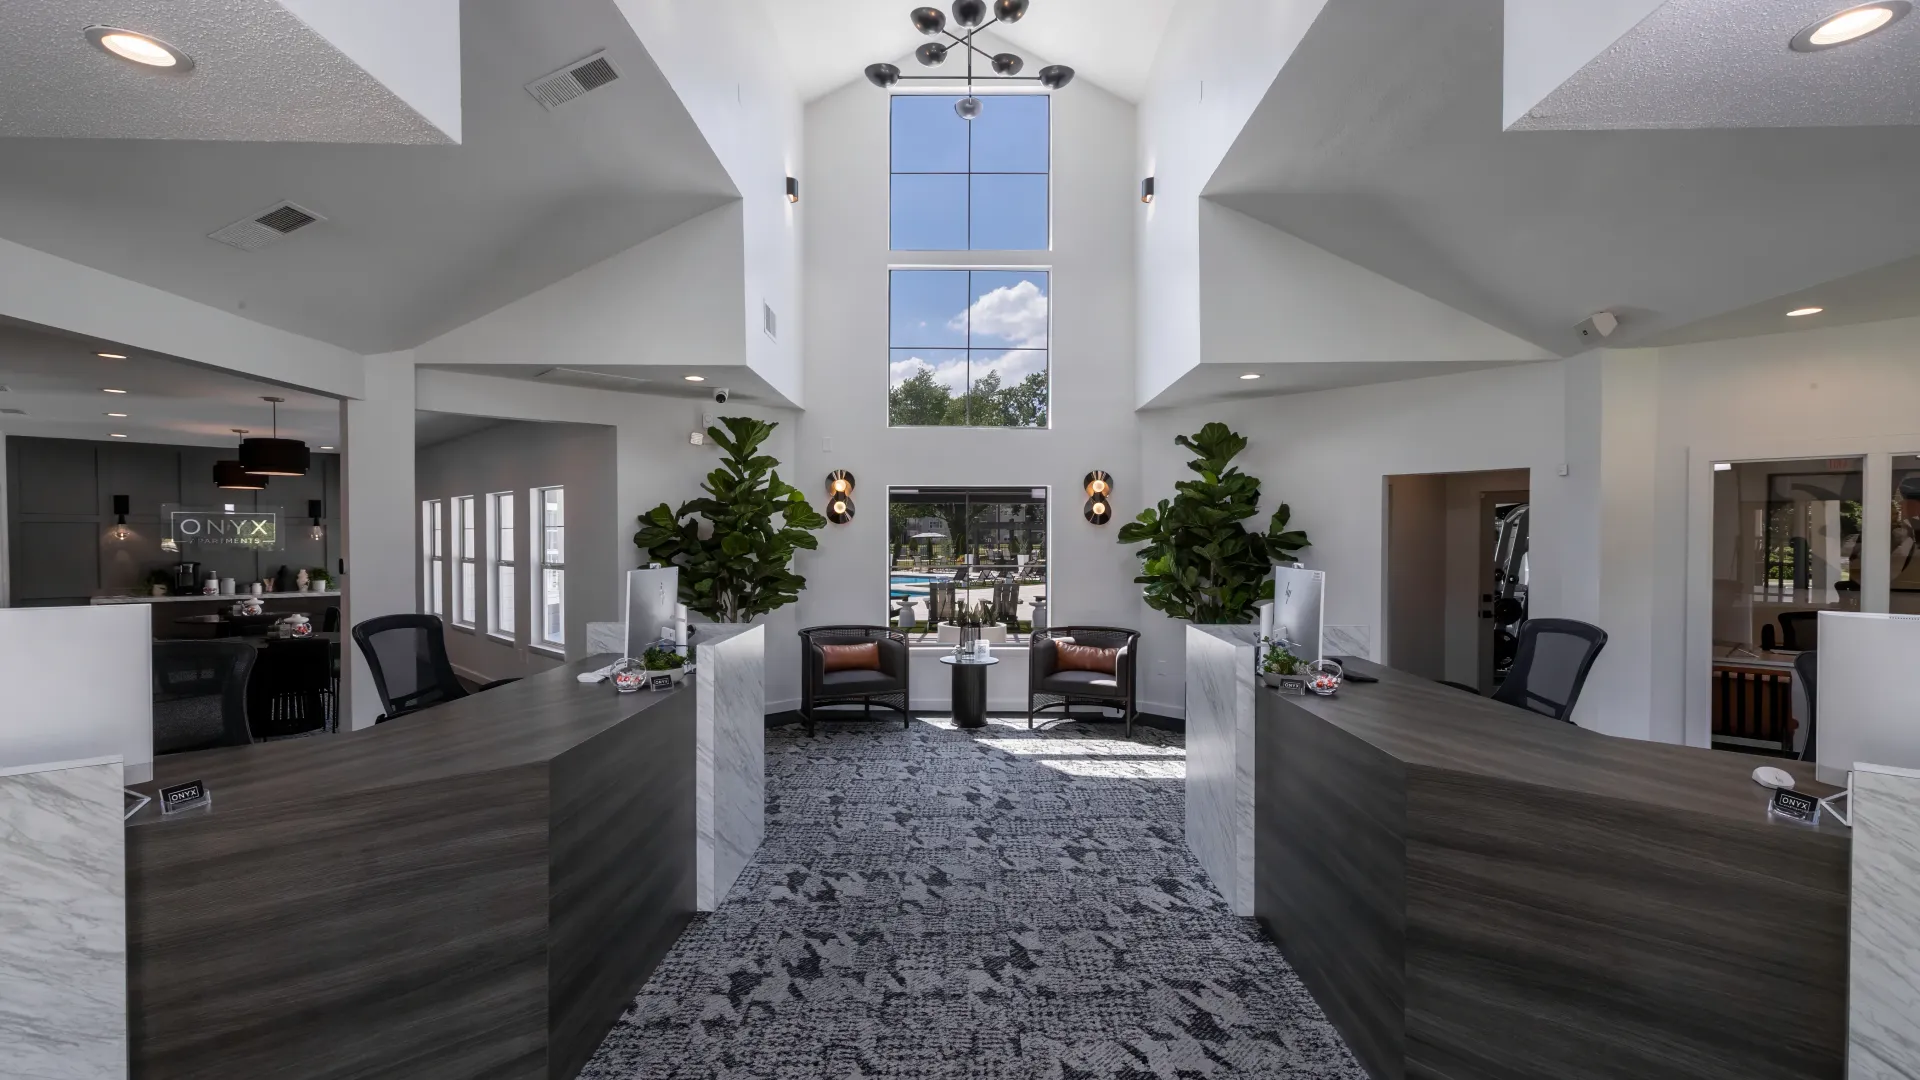 Interior view of the Onyx Apartments leasing office featuring modern design, high ceilings, large windows, stylish furnishings, and a welcoming reception area.